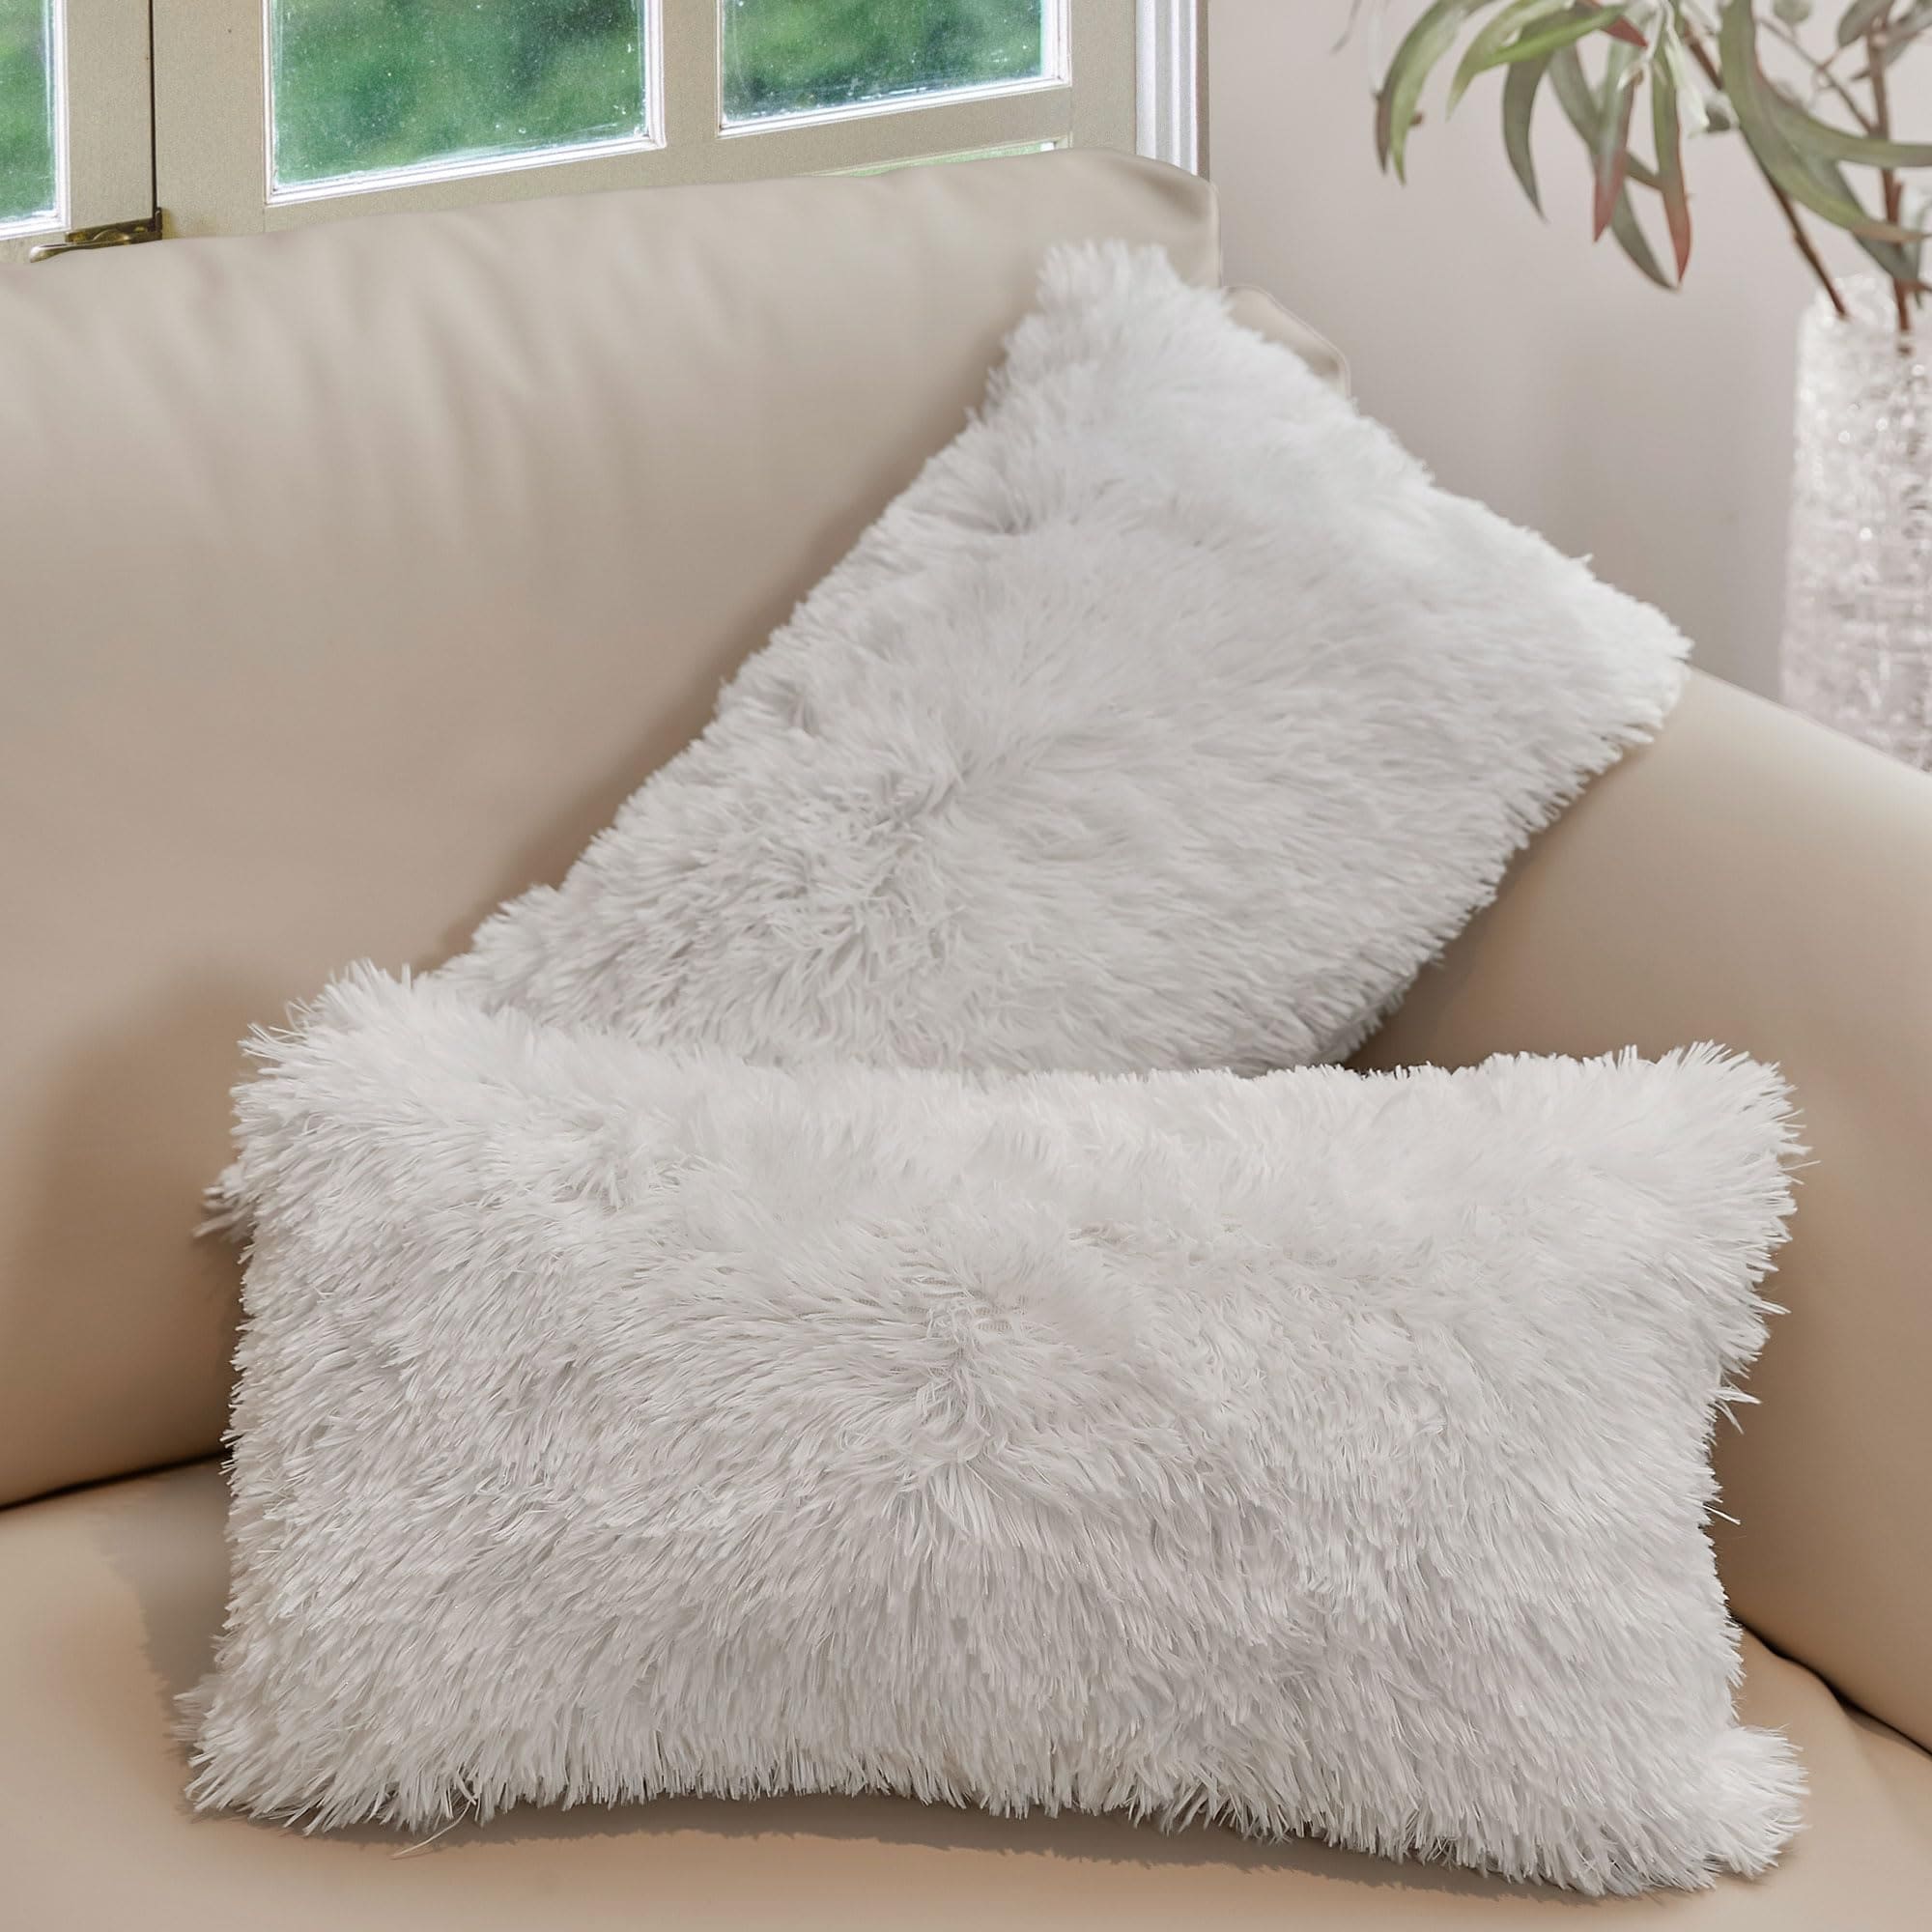 Cheer Collection Shaggy Long Hair Throw Pillows - Super Soft and Plush Faux Fur Lumbar Accent Pillows - Set of 2 - Red - 12 x 20 in